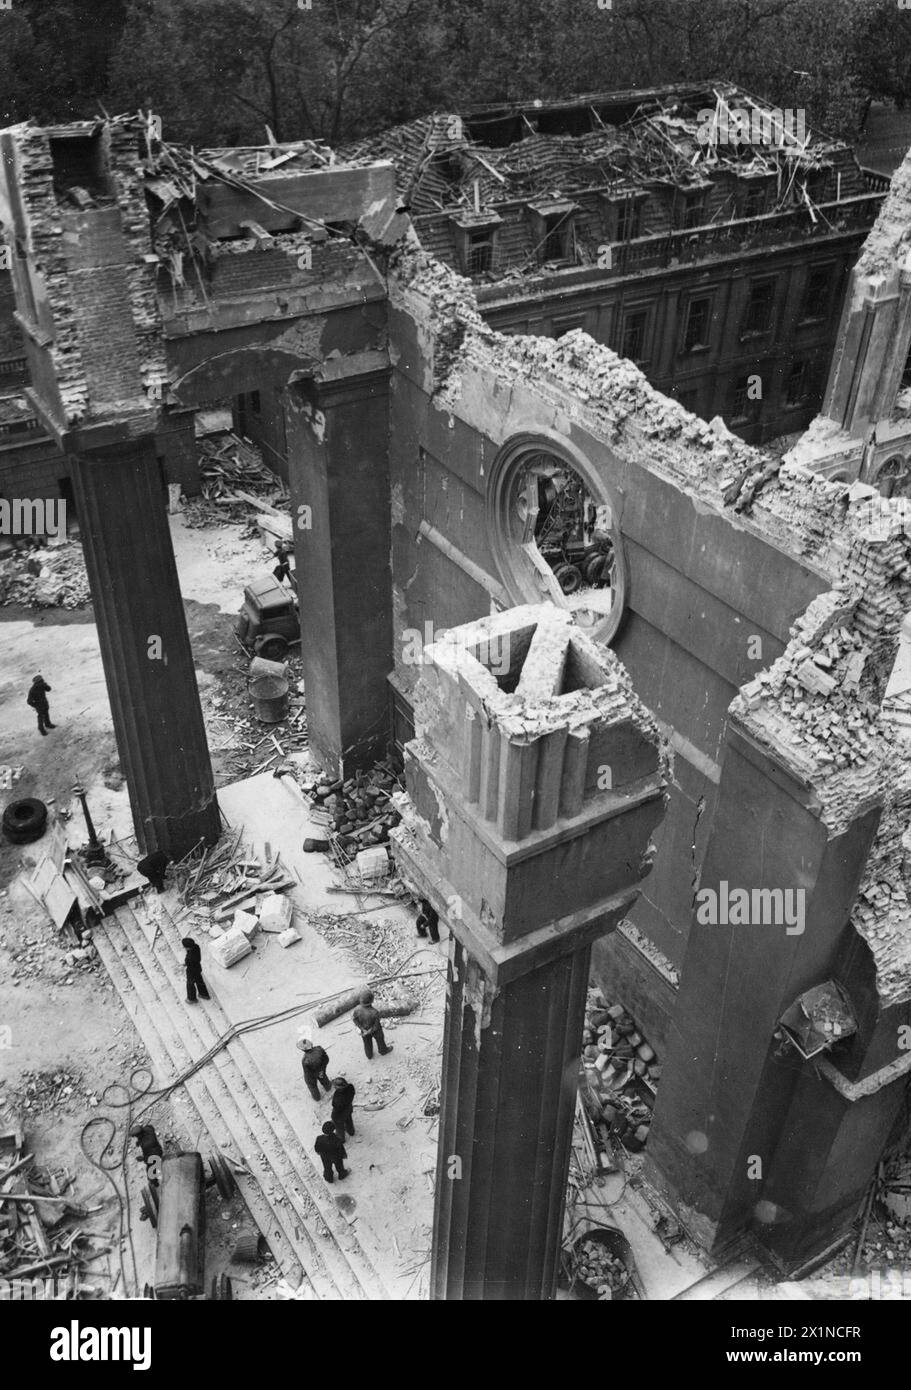 BOMB DAMAGE: 1944 - Ruined Guards Chapel, Aerial perspective. B&W photographic print with typed caption on reverse and censorship marks, Stock Photo